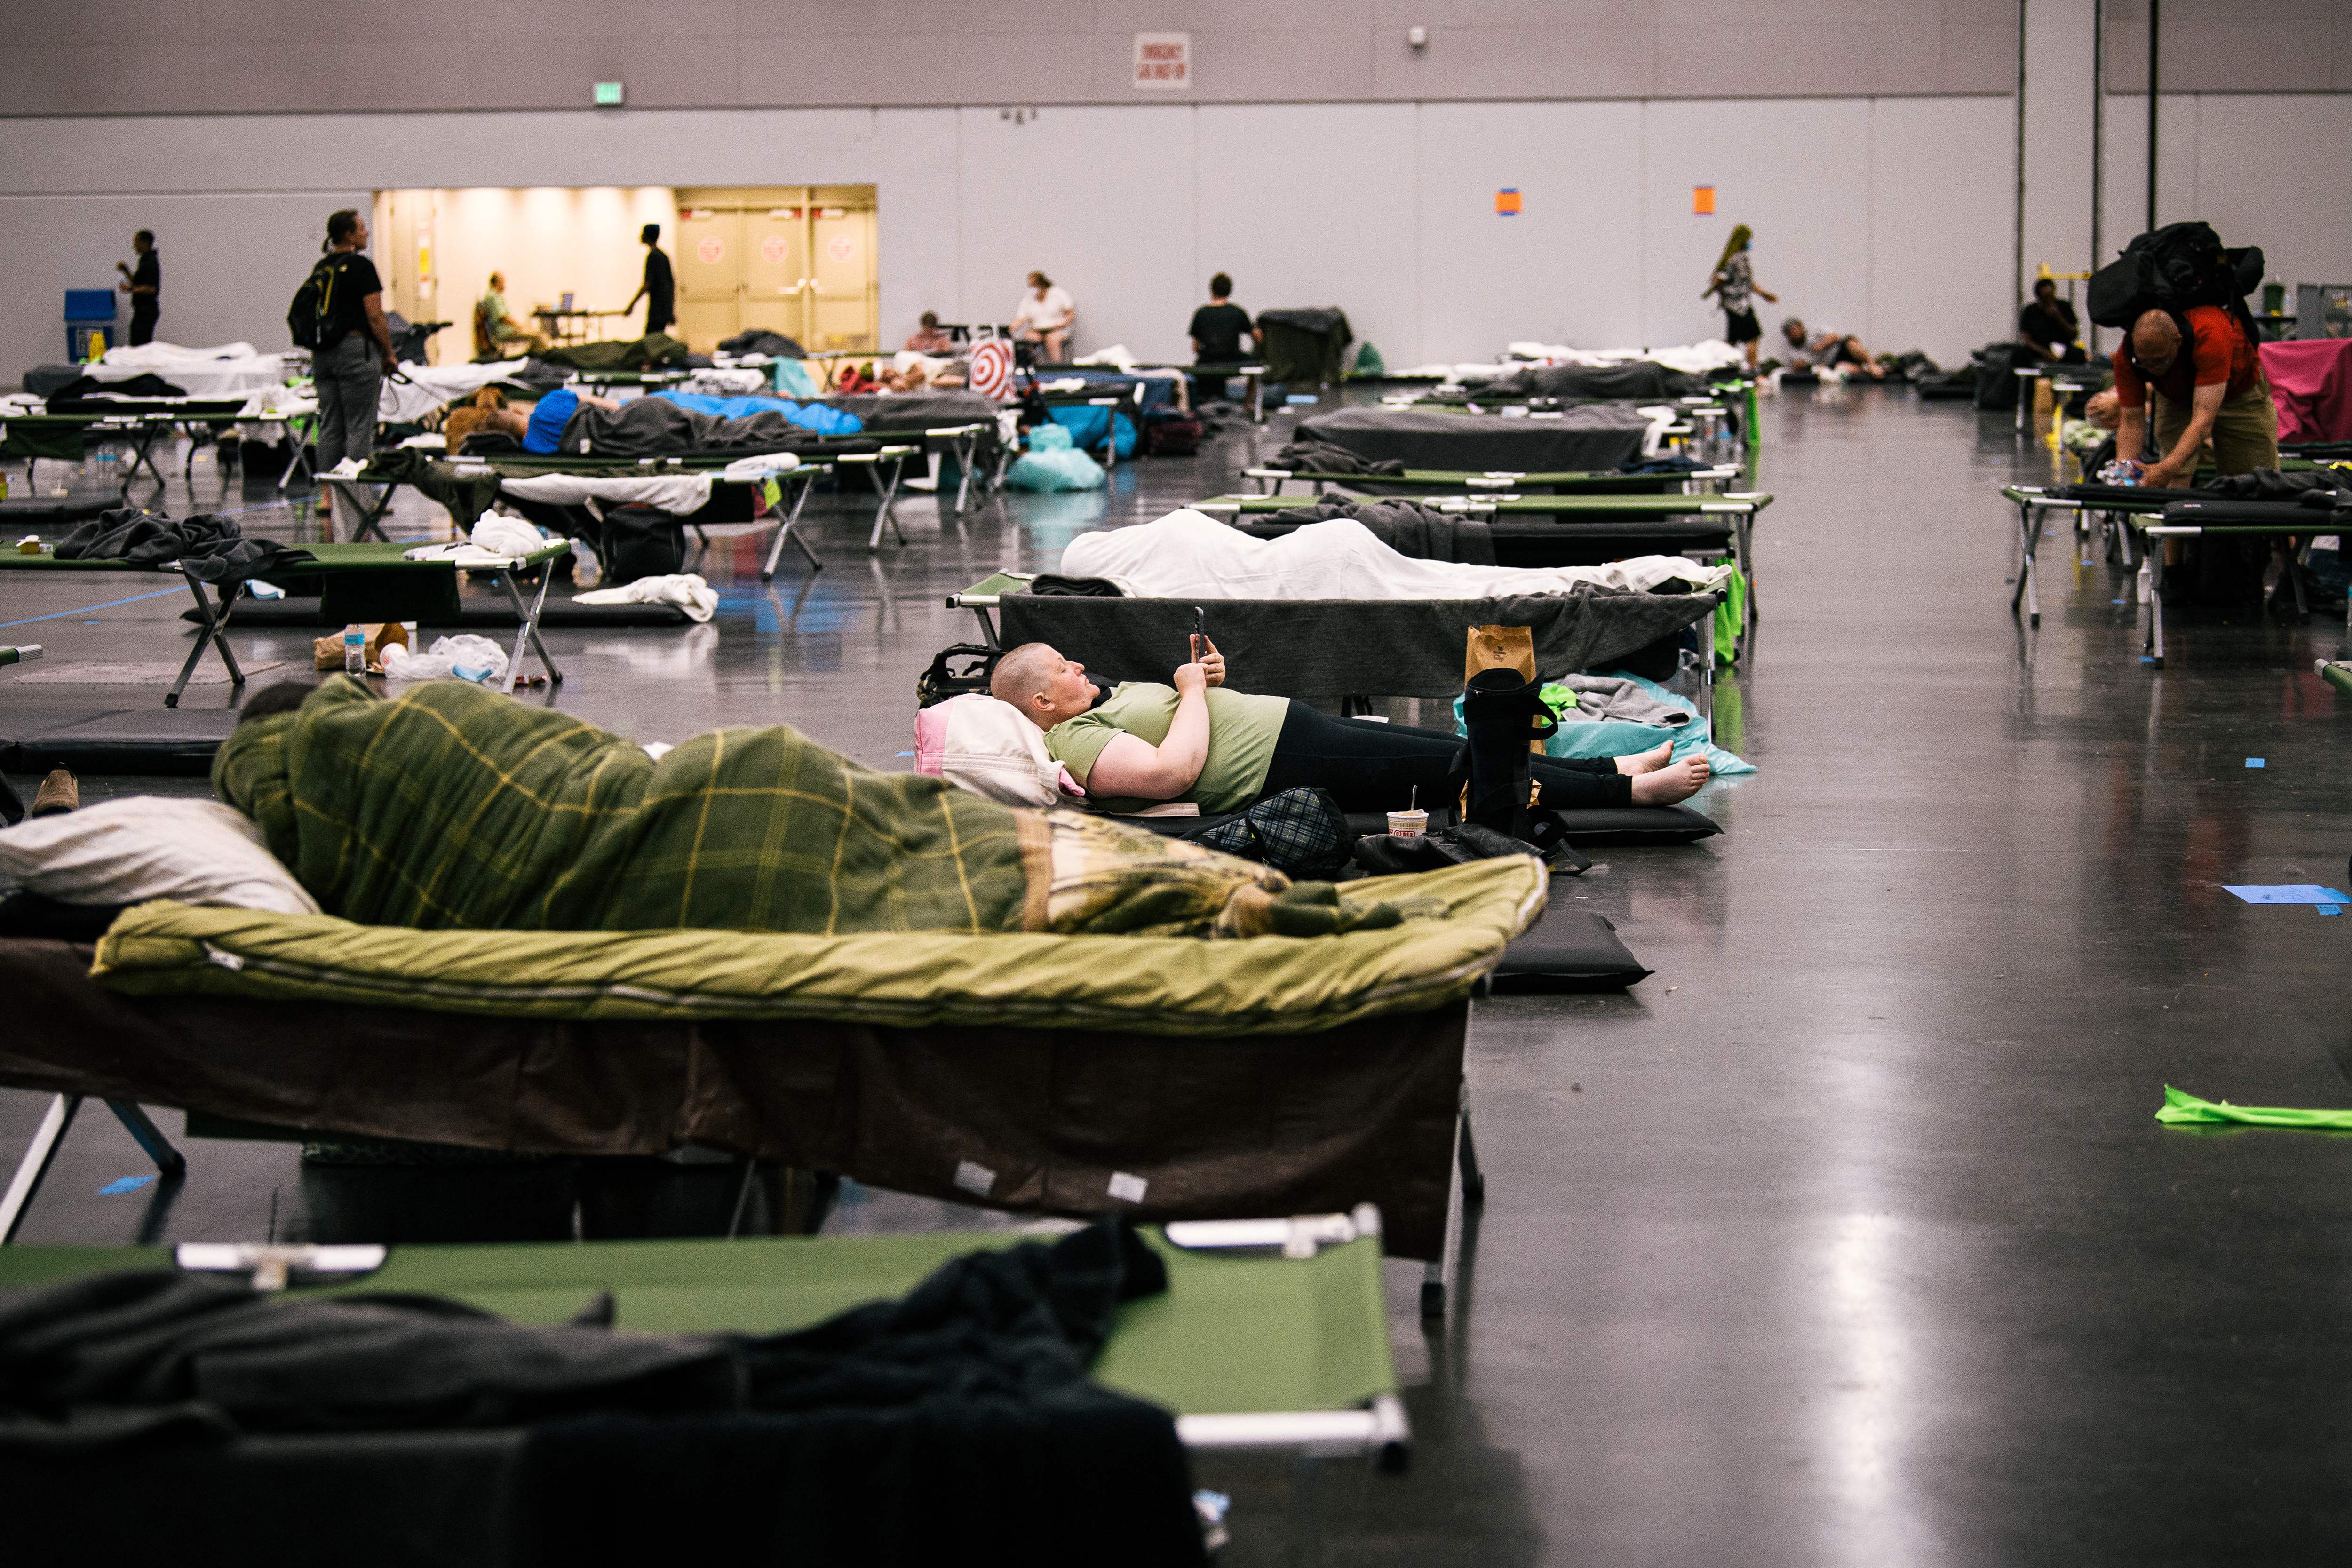 People rest at the Oregon Convention Center cooling station in Oregon, Portland on June 28, 2021, as a heatwave moves over much of the United States